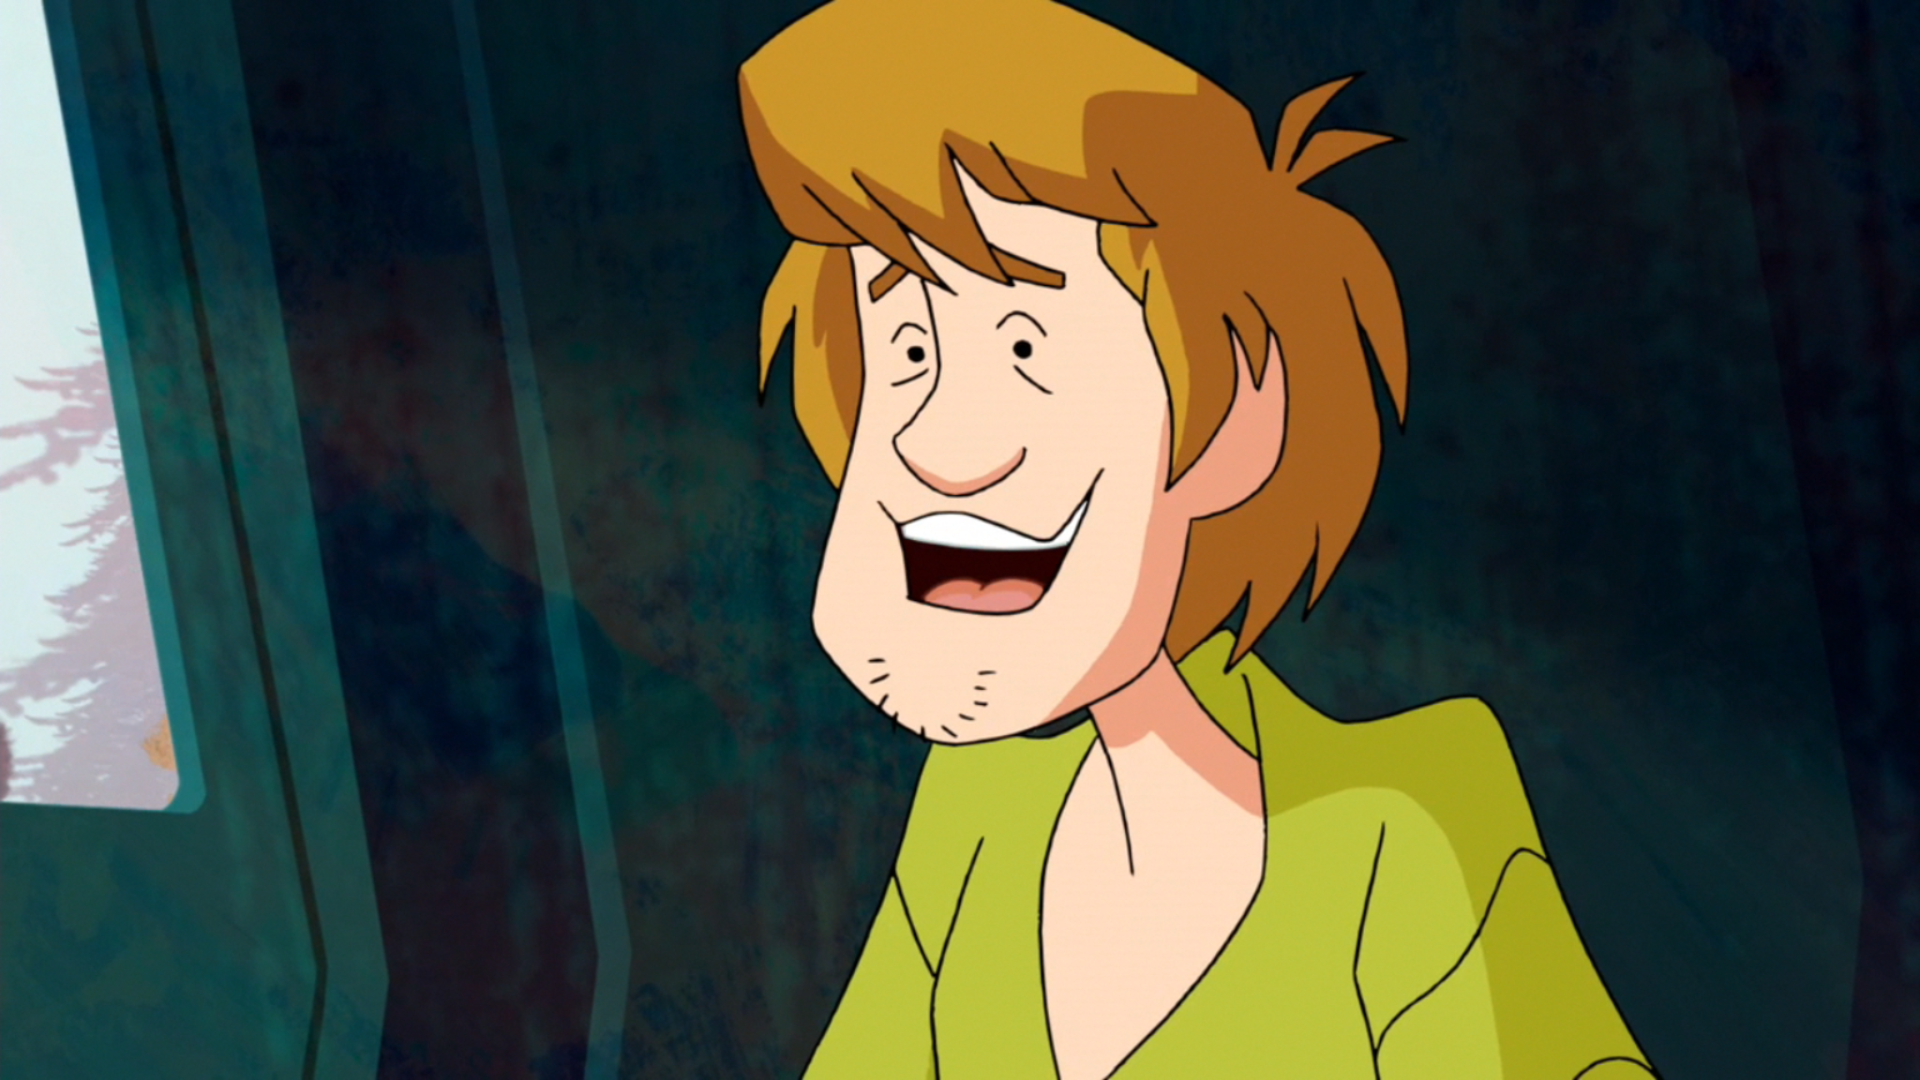 Baby Shaggy Rogers And Scooby Doo Wallpapers